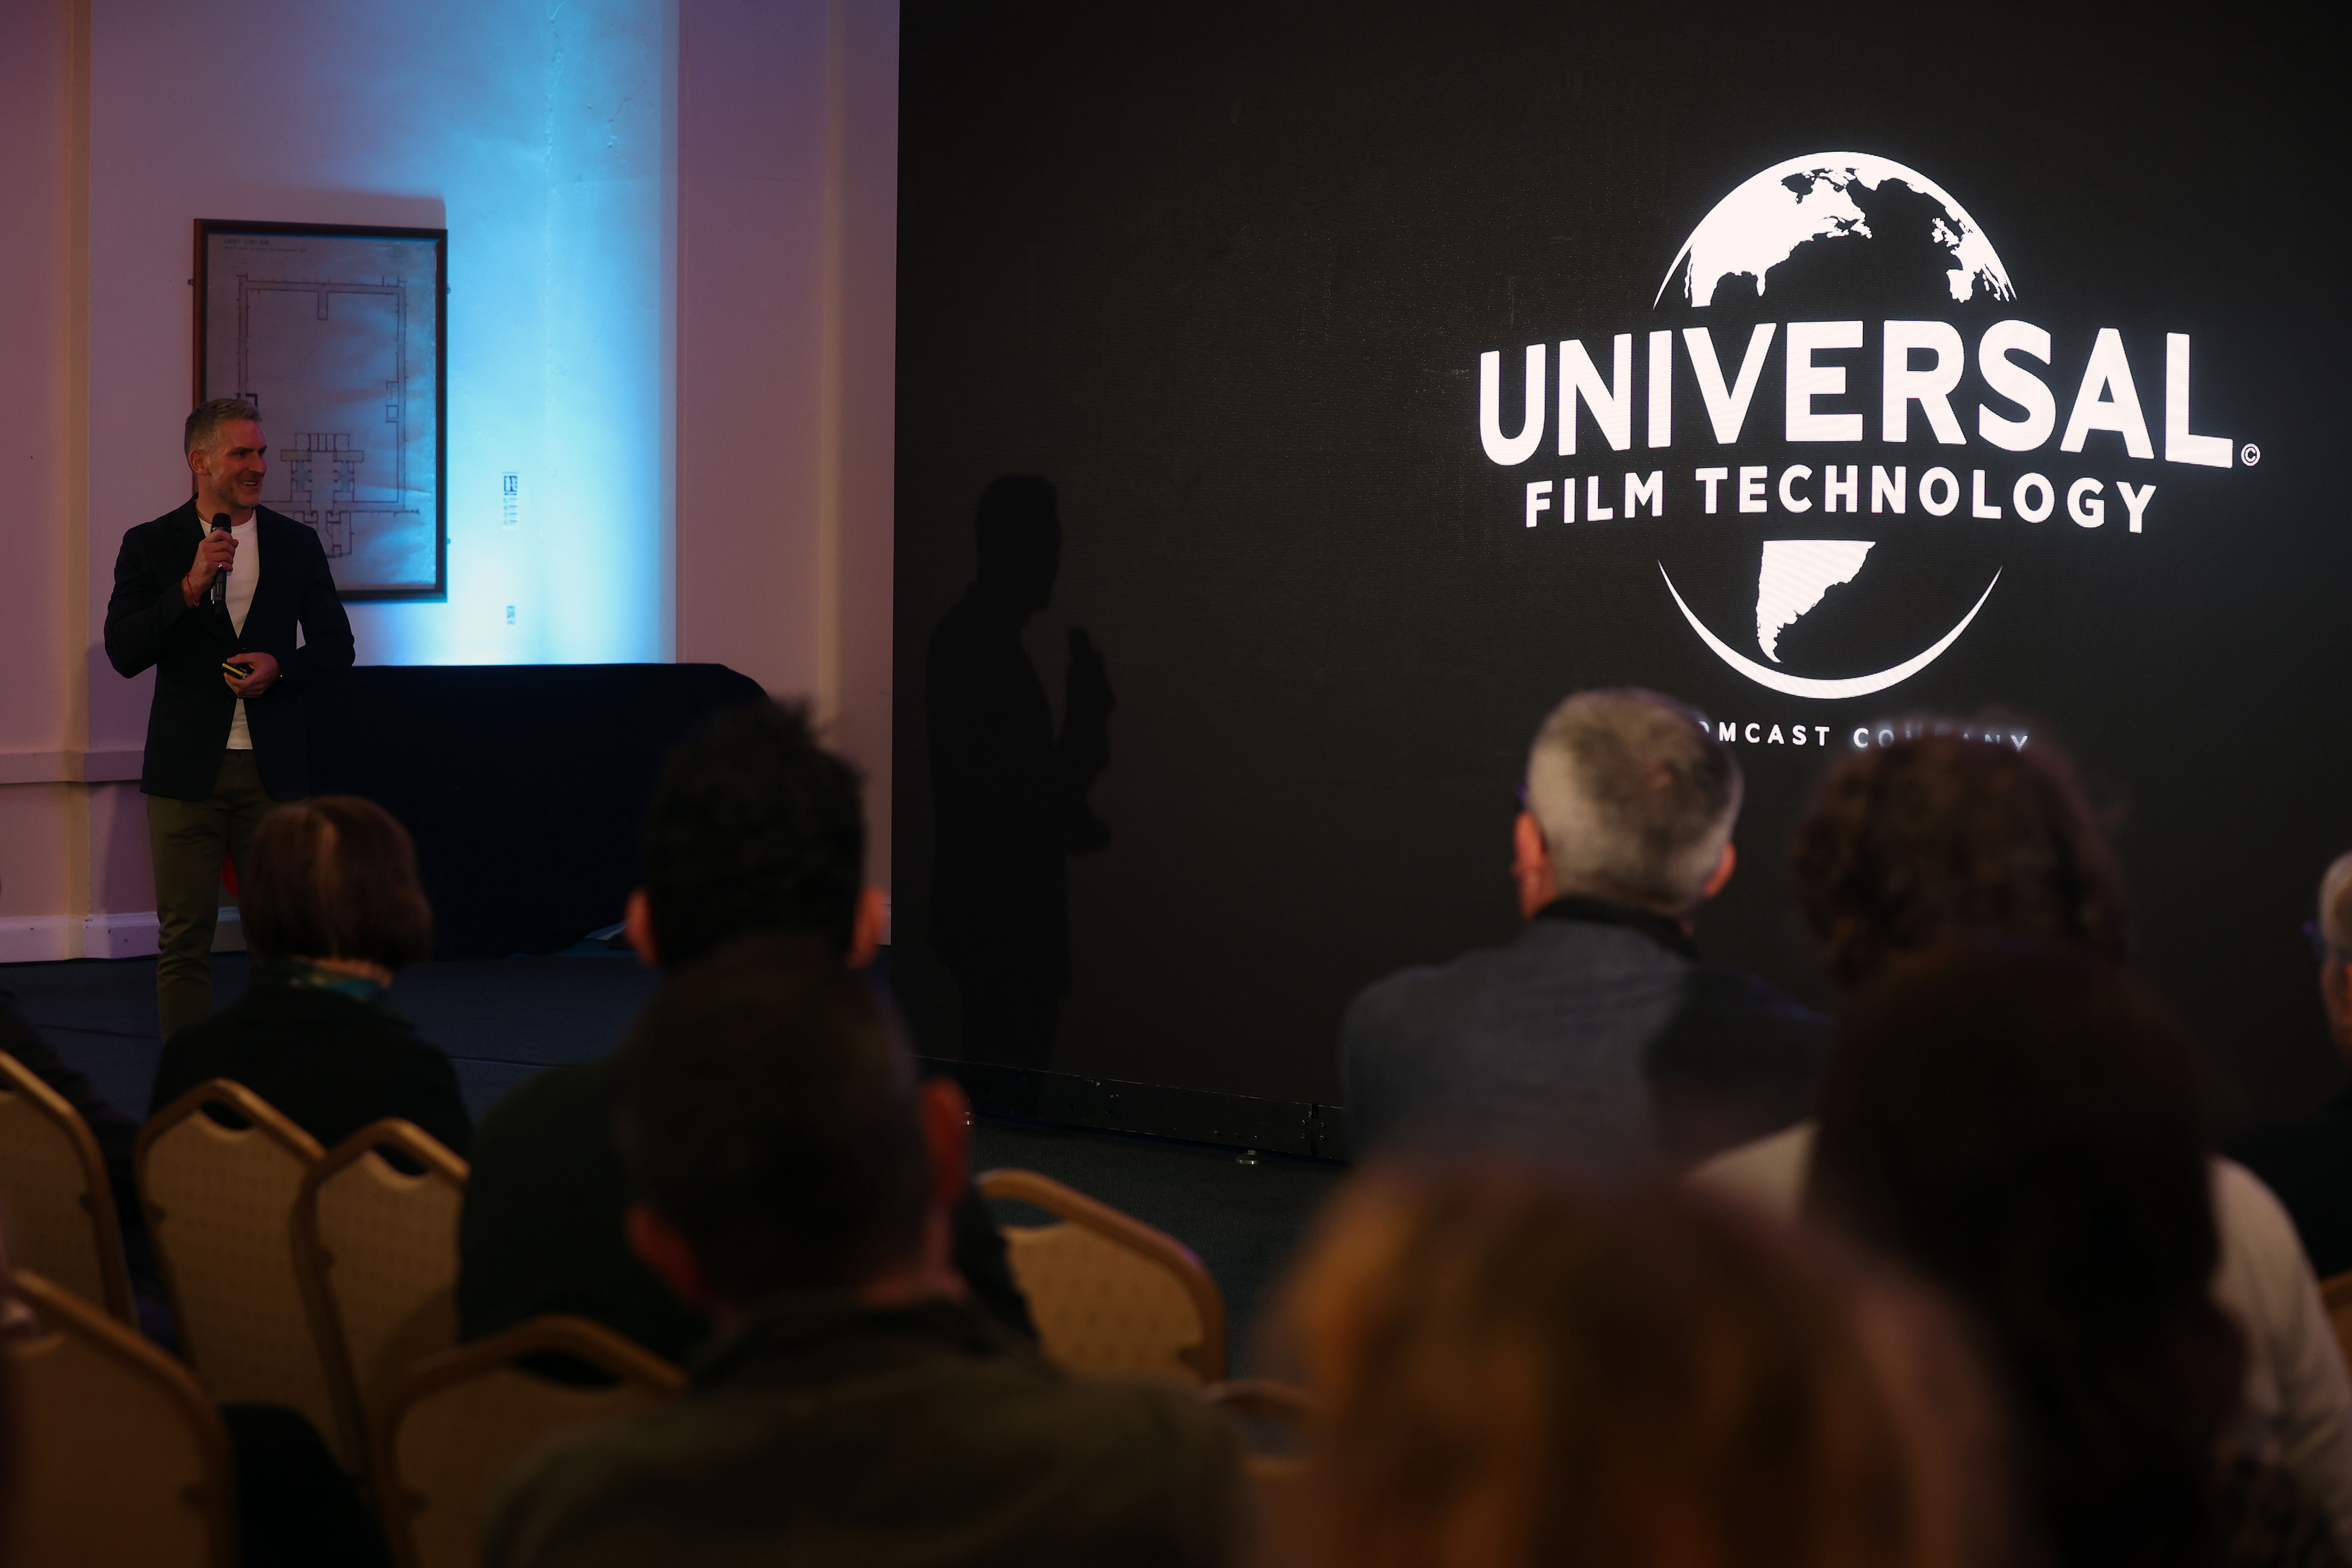 Greg Reed presents at ClwstwrVerse infront of LED screen featuring Universal Pictures logo